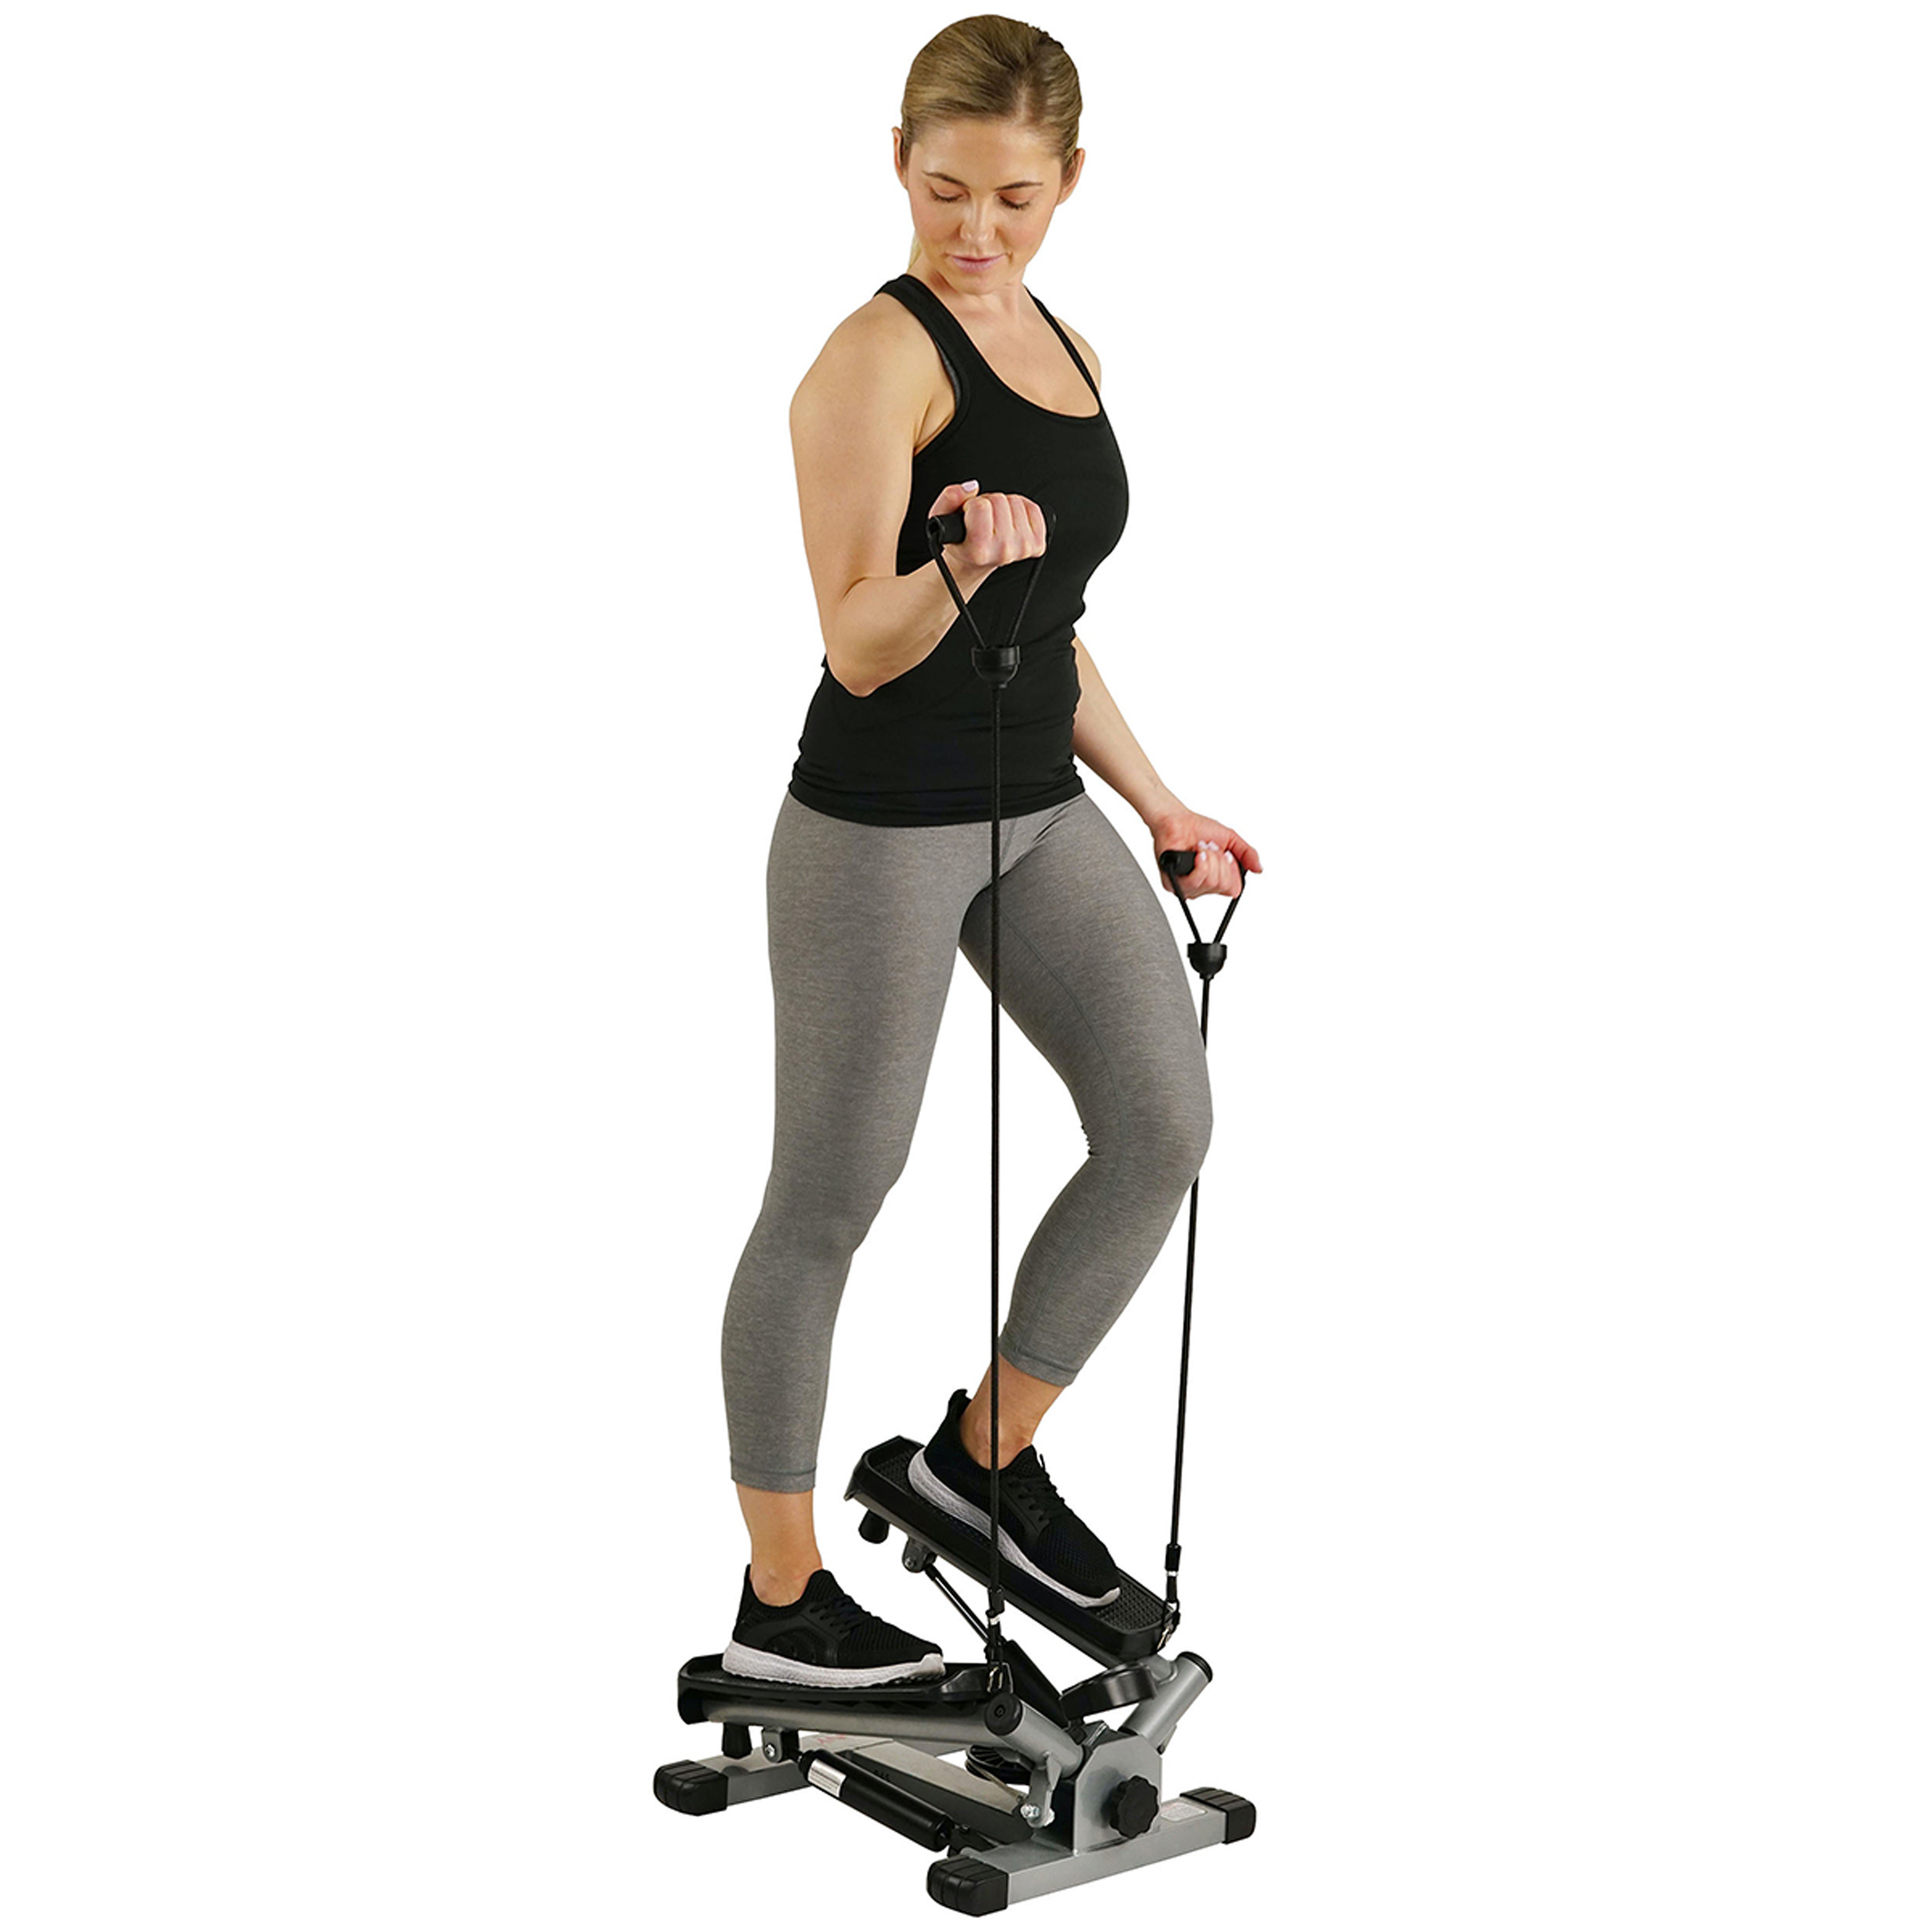 Sunny Health & Fitness Twist Stair Stepper Machine with Resistance Bands with Adjustable Height, NO. 045 - image 1 of 11